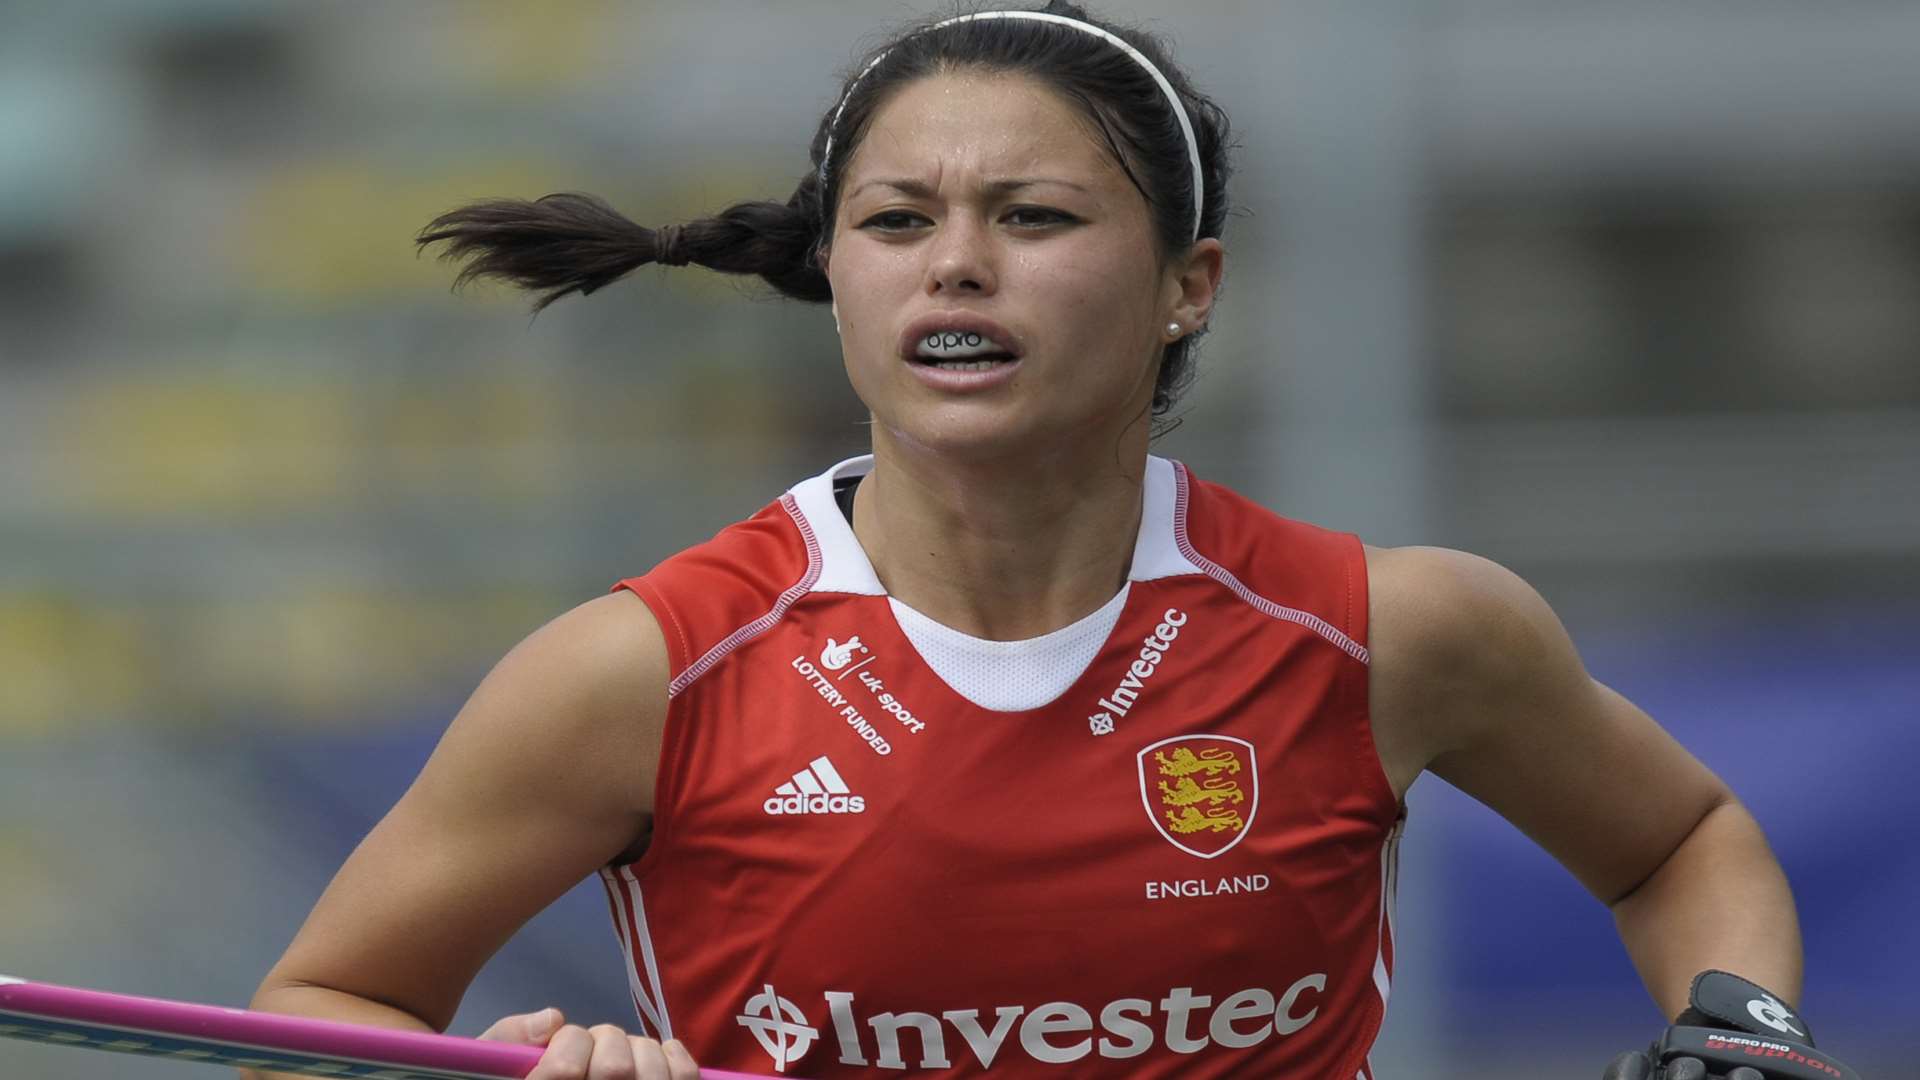 Sam Quek in action on the hockey pitch. Picture: Ady Kerry/England Hockey